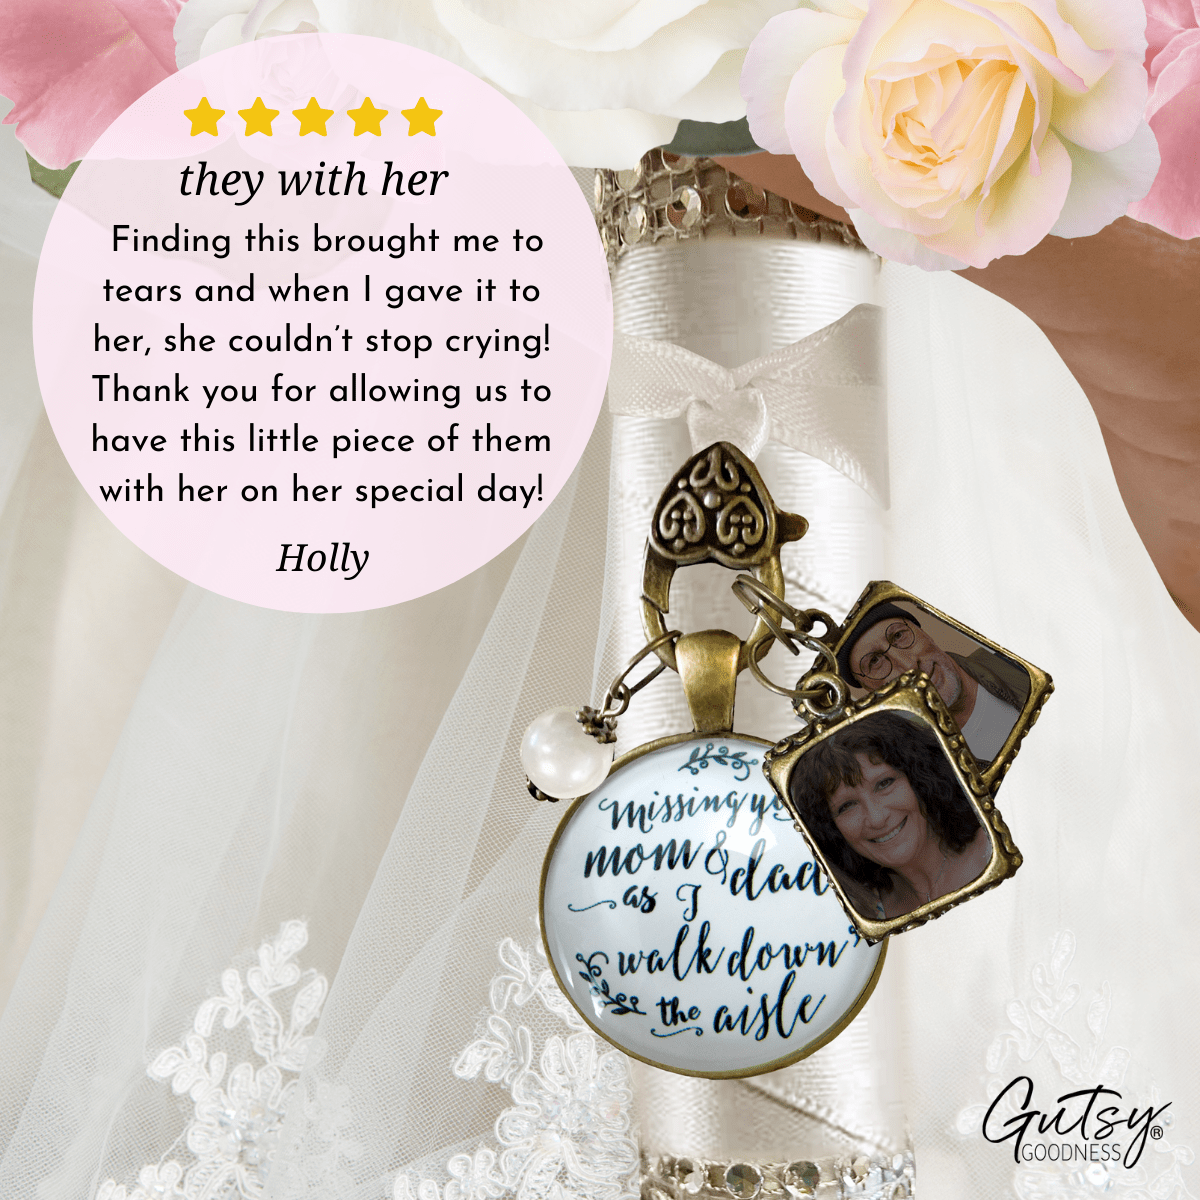 Bouquet Charm Of Mom And Dad White Rustic Memory 2 Photo Frames Wedding Jewelry - Gutsy Goodness Handmade Jewelry Gifts